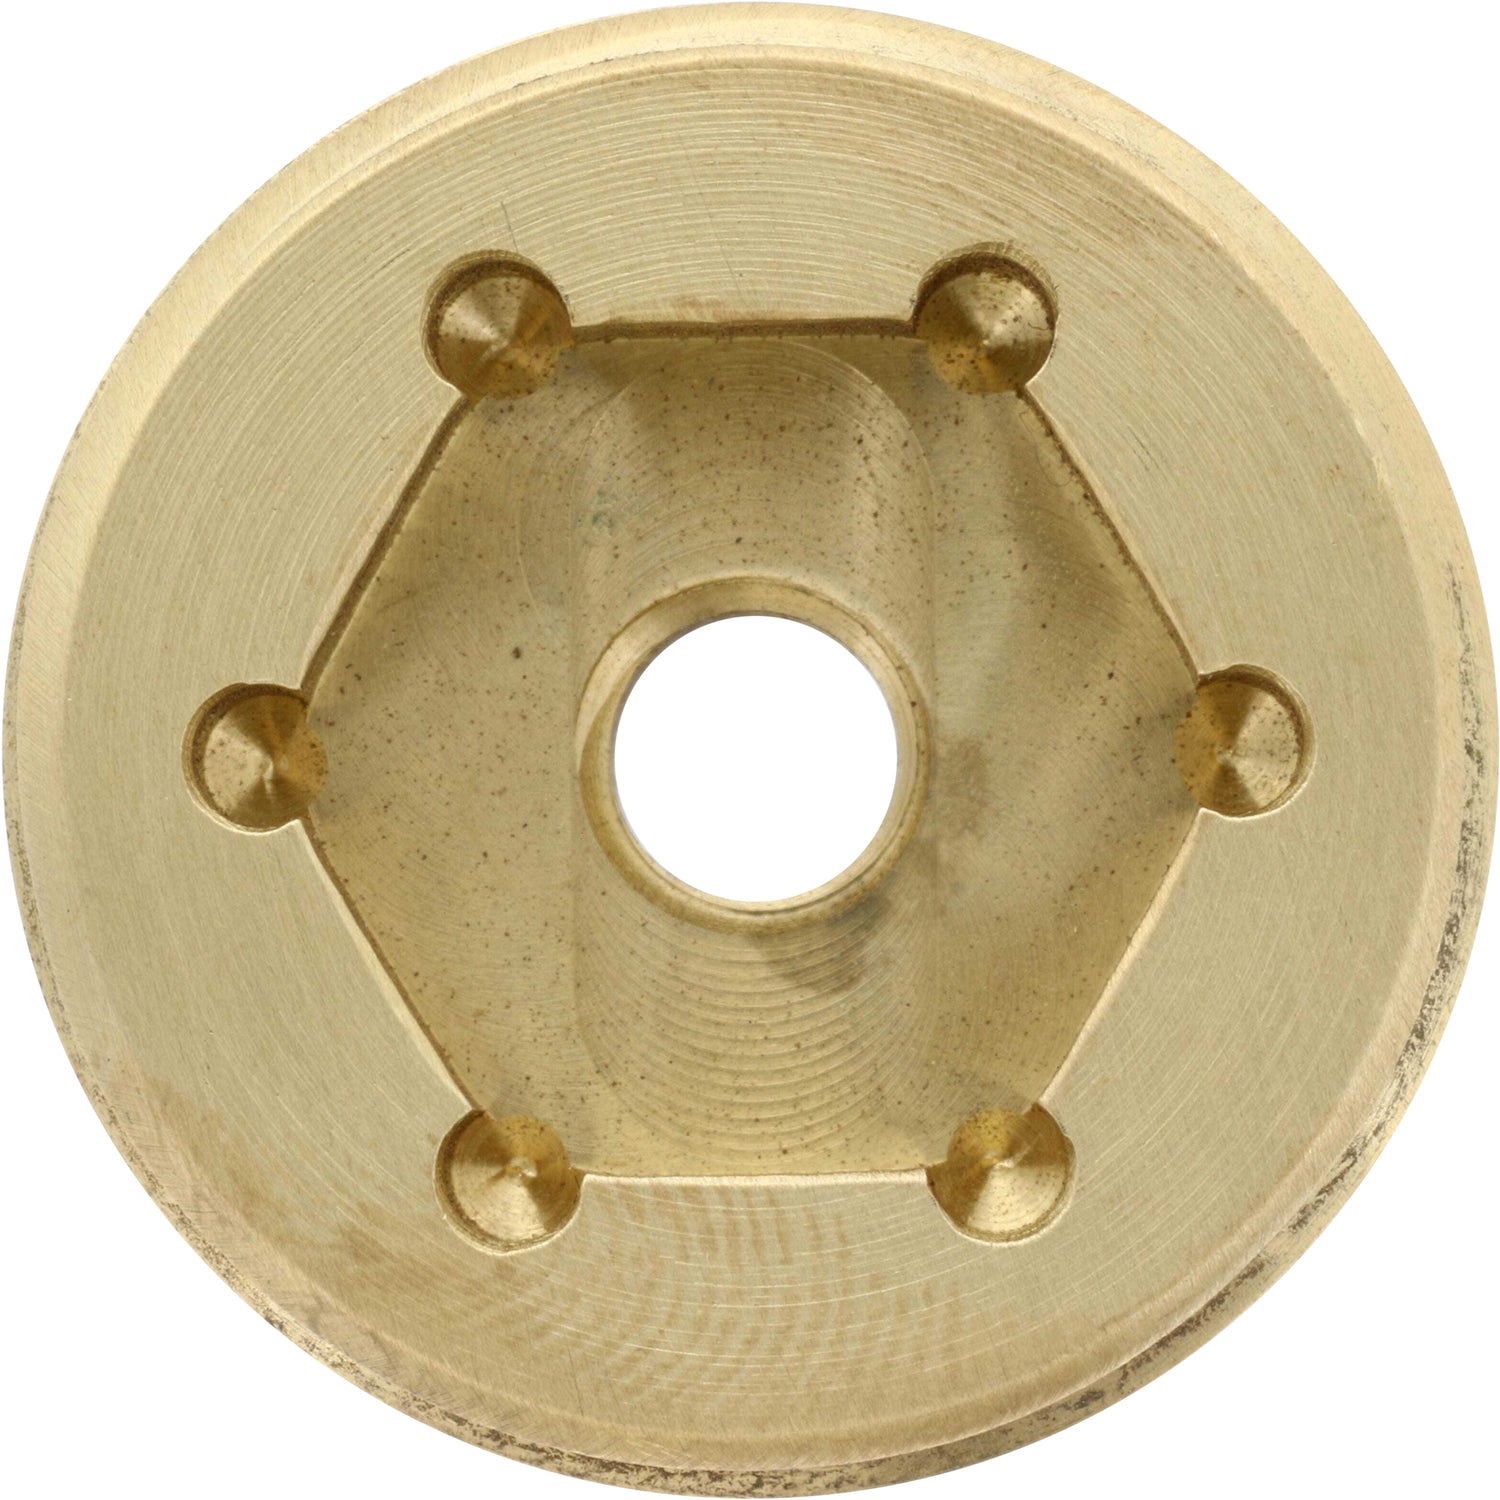 Circular top surface of machined brass on white background. Surface has a hexagonal cut out in the center with a circular threaded through hole cut through the part. FC6B